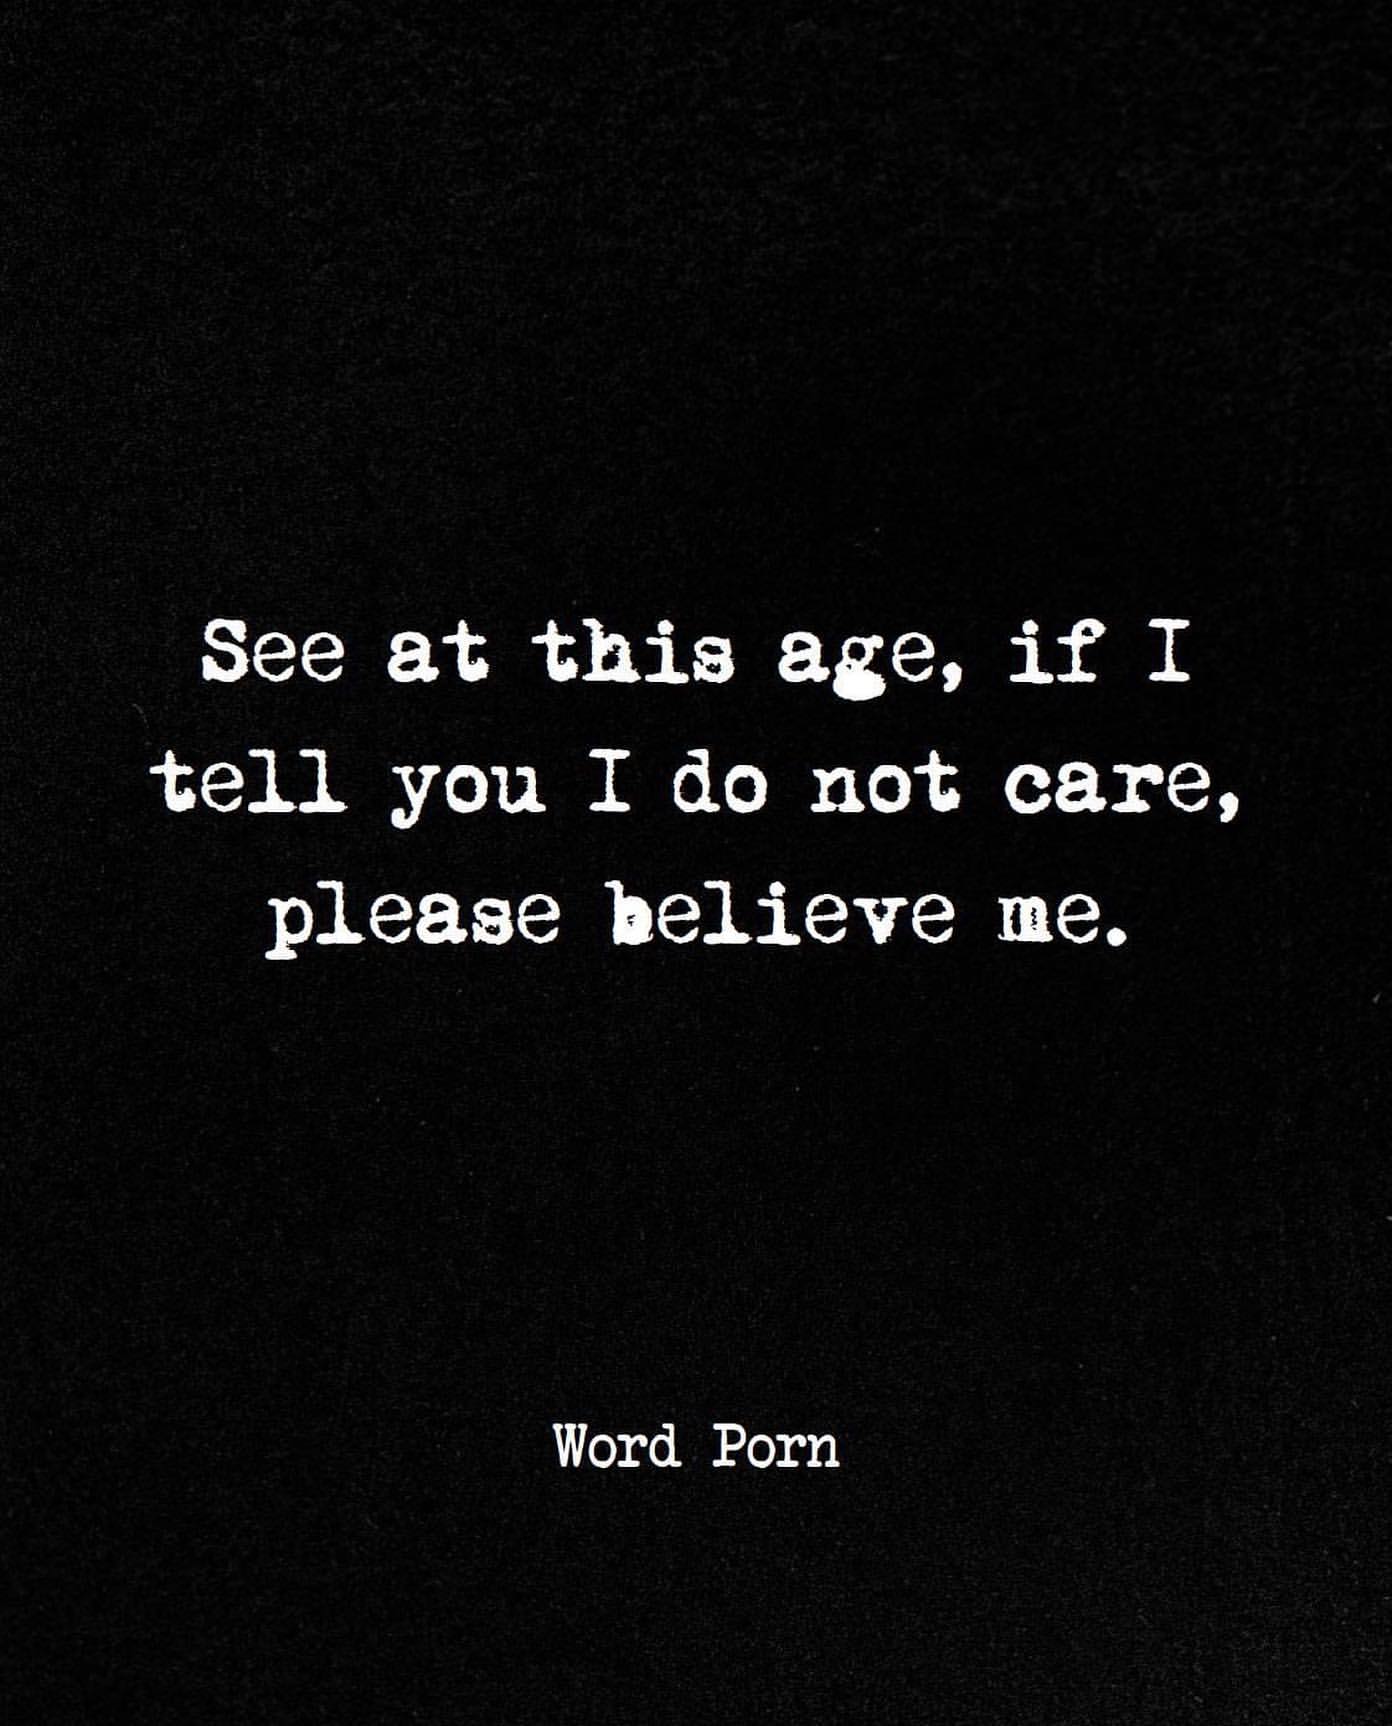 See at this age, if I tell you I do not care, please believe me.